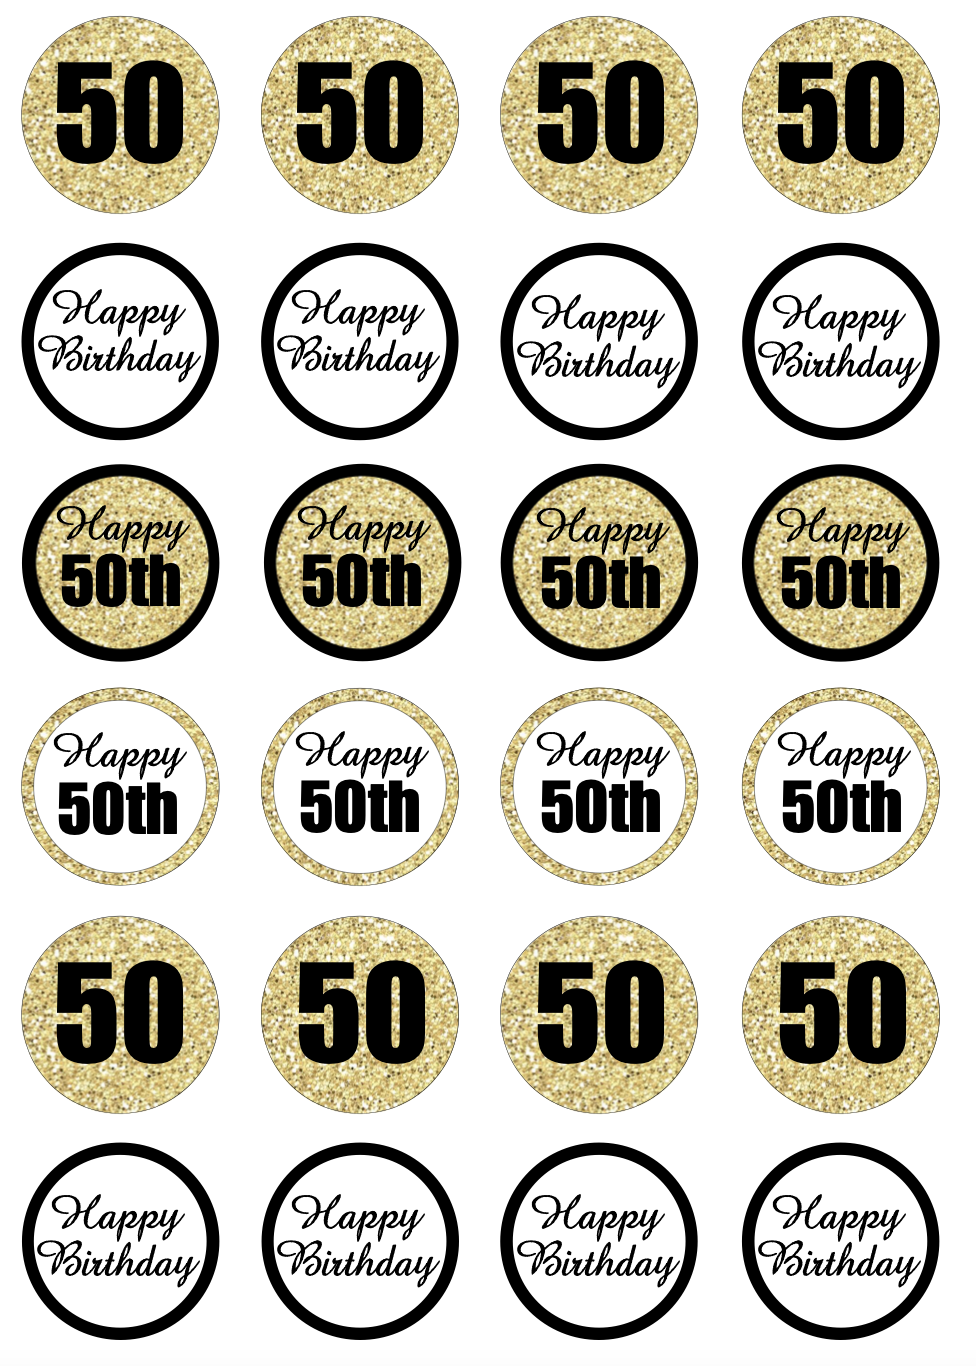 50th Birthday Black & Gold Cupcake Edible Icing Image Toppers